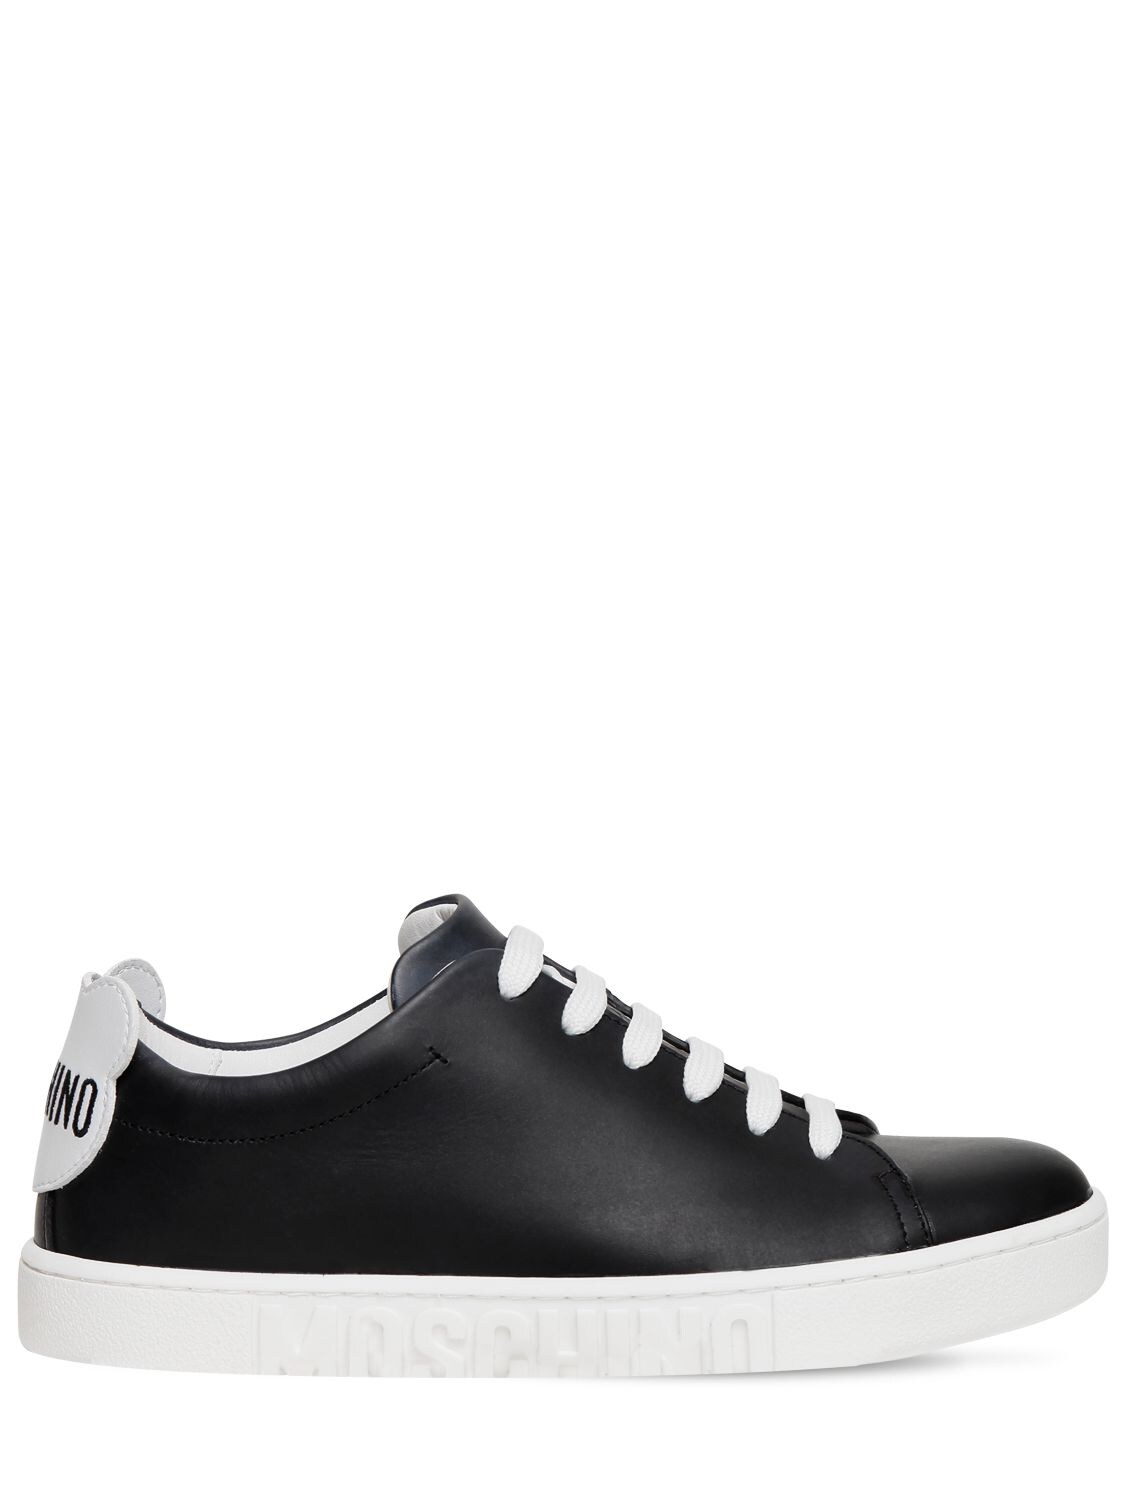 Moschino Teddy Patch Sneakers In Black And White In Black,white